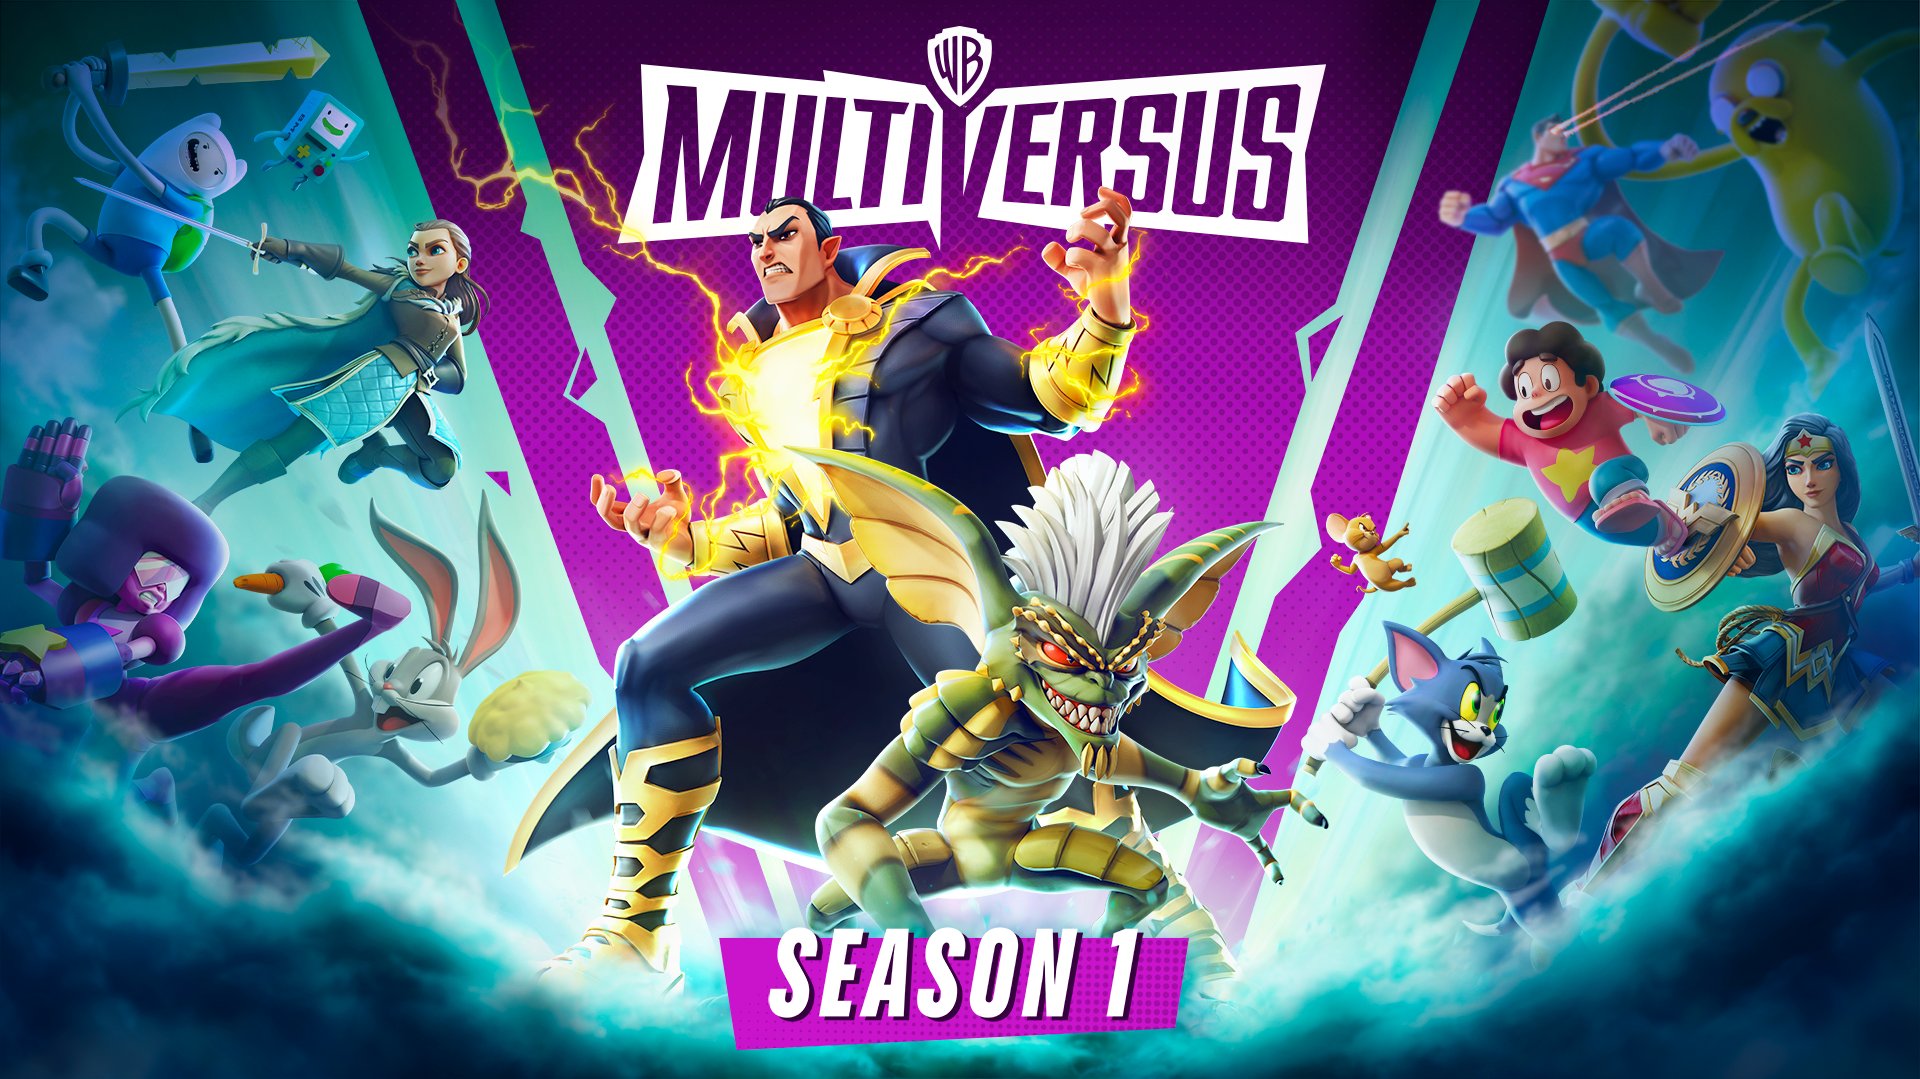 MultiVersus Season 1 reveals next characters: Black Adam, Gremlin, and Rick and Morty